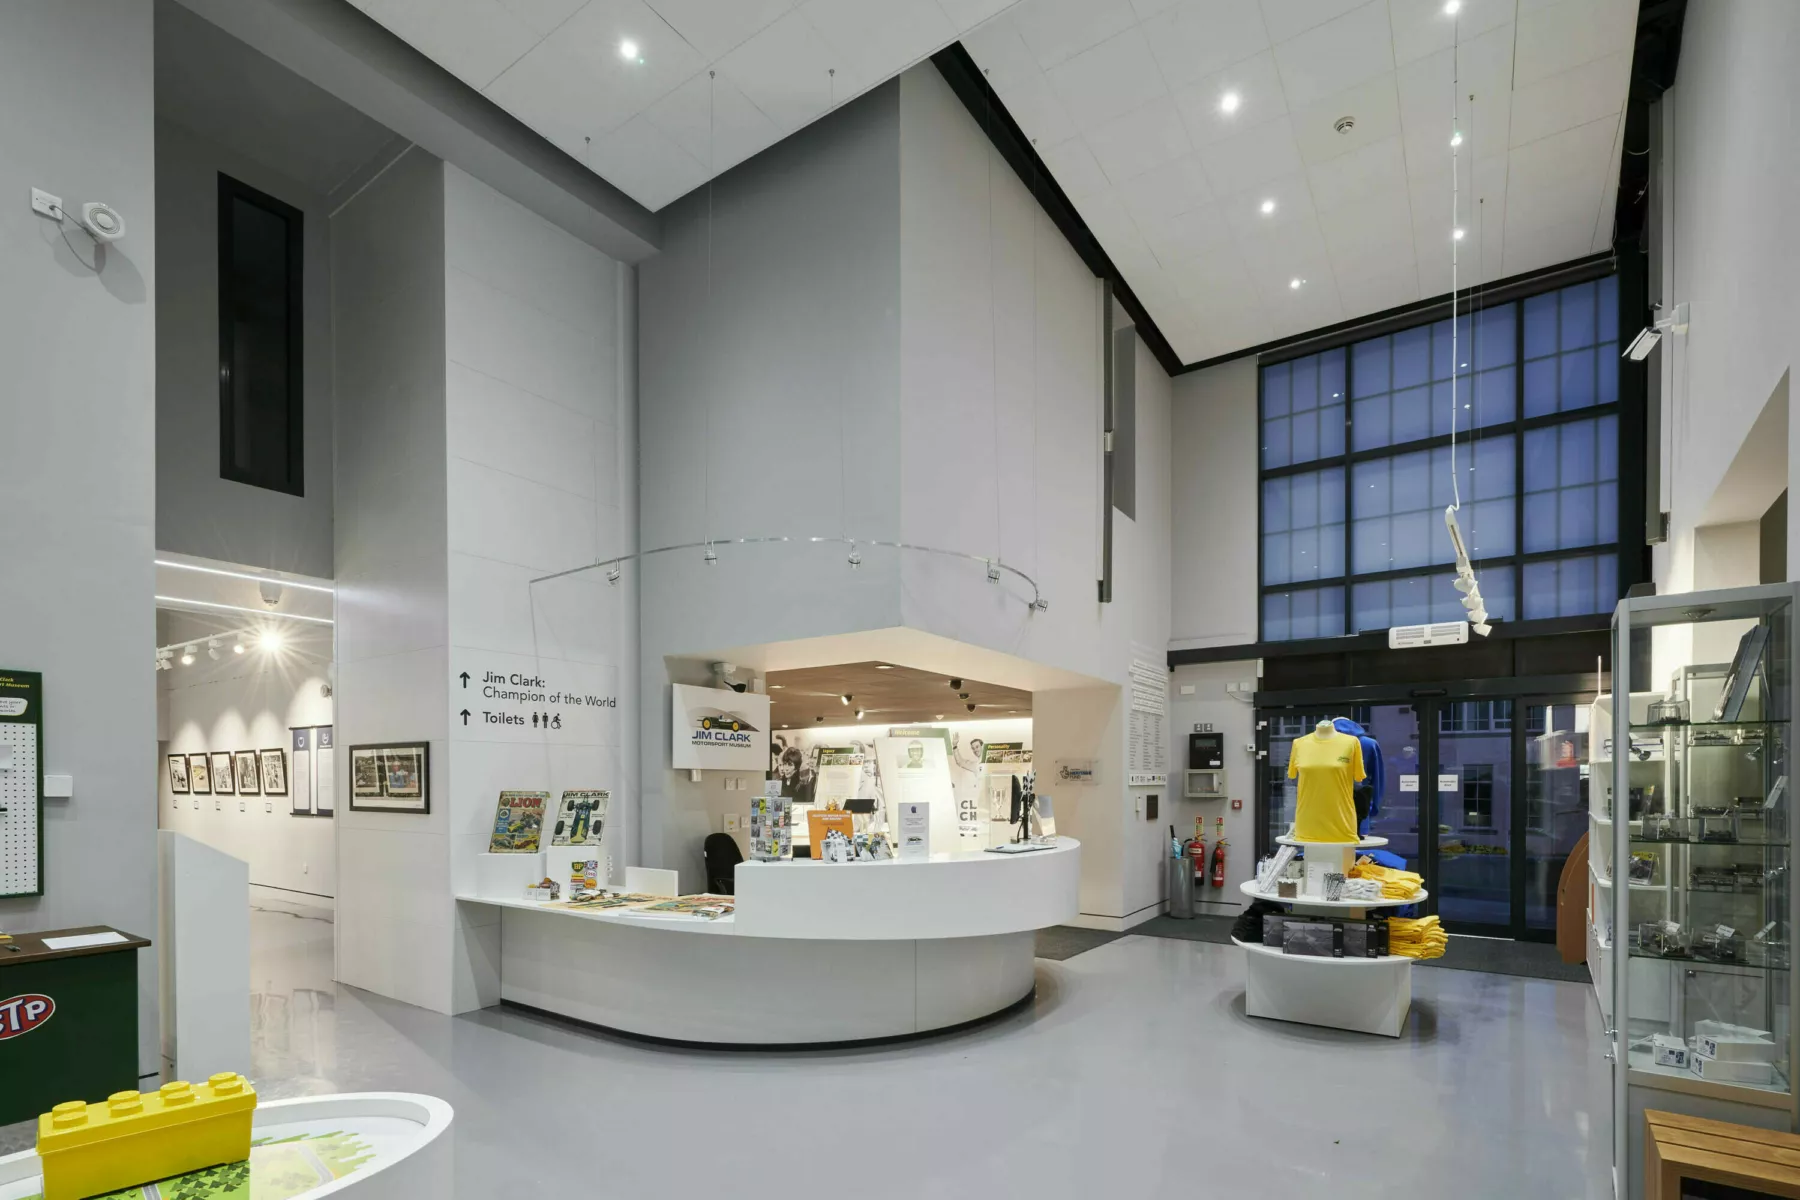 Inside the entrance atrium at the Jim Clark Motorsport Museum, Scottish Borders. A double height space with curved reception desk and displays of merchandise. Through a doorway is one of the exhibition rooms.